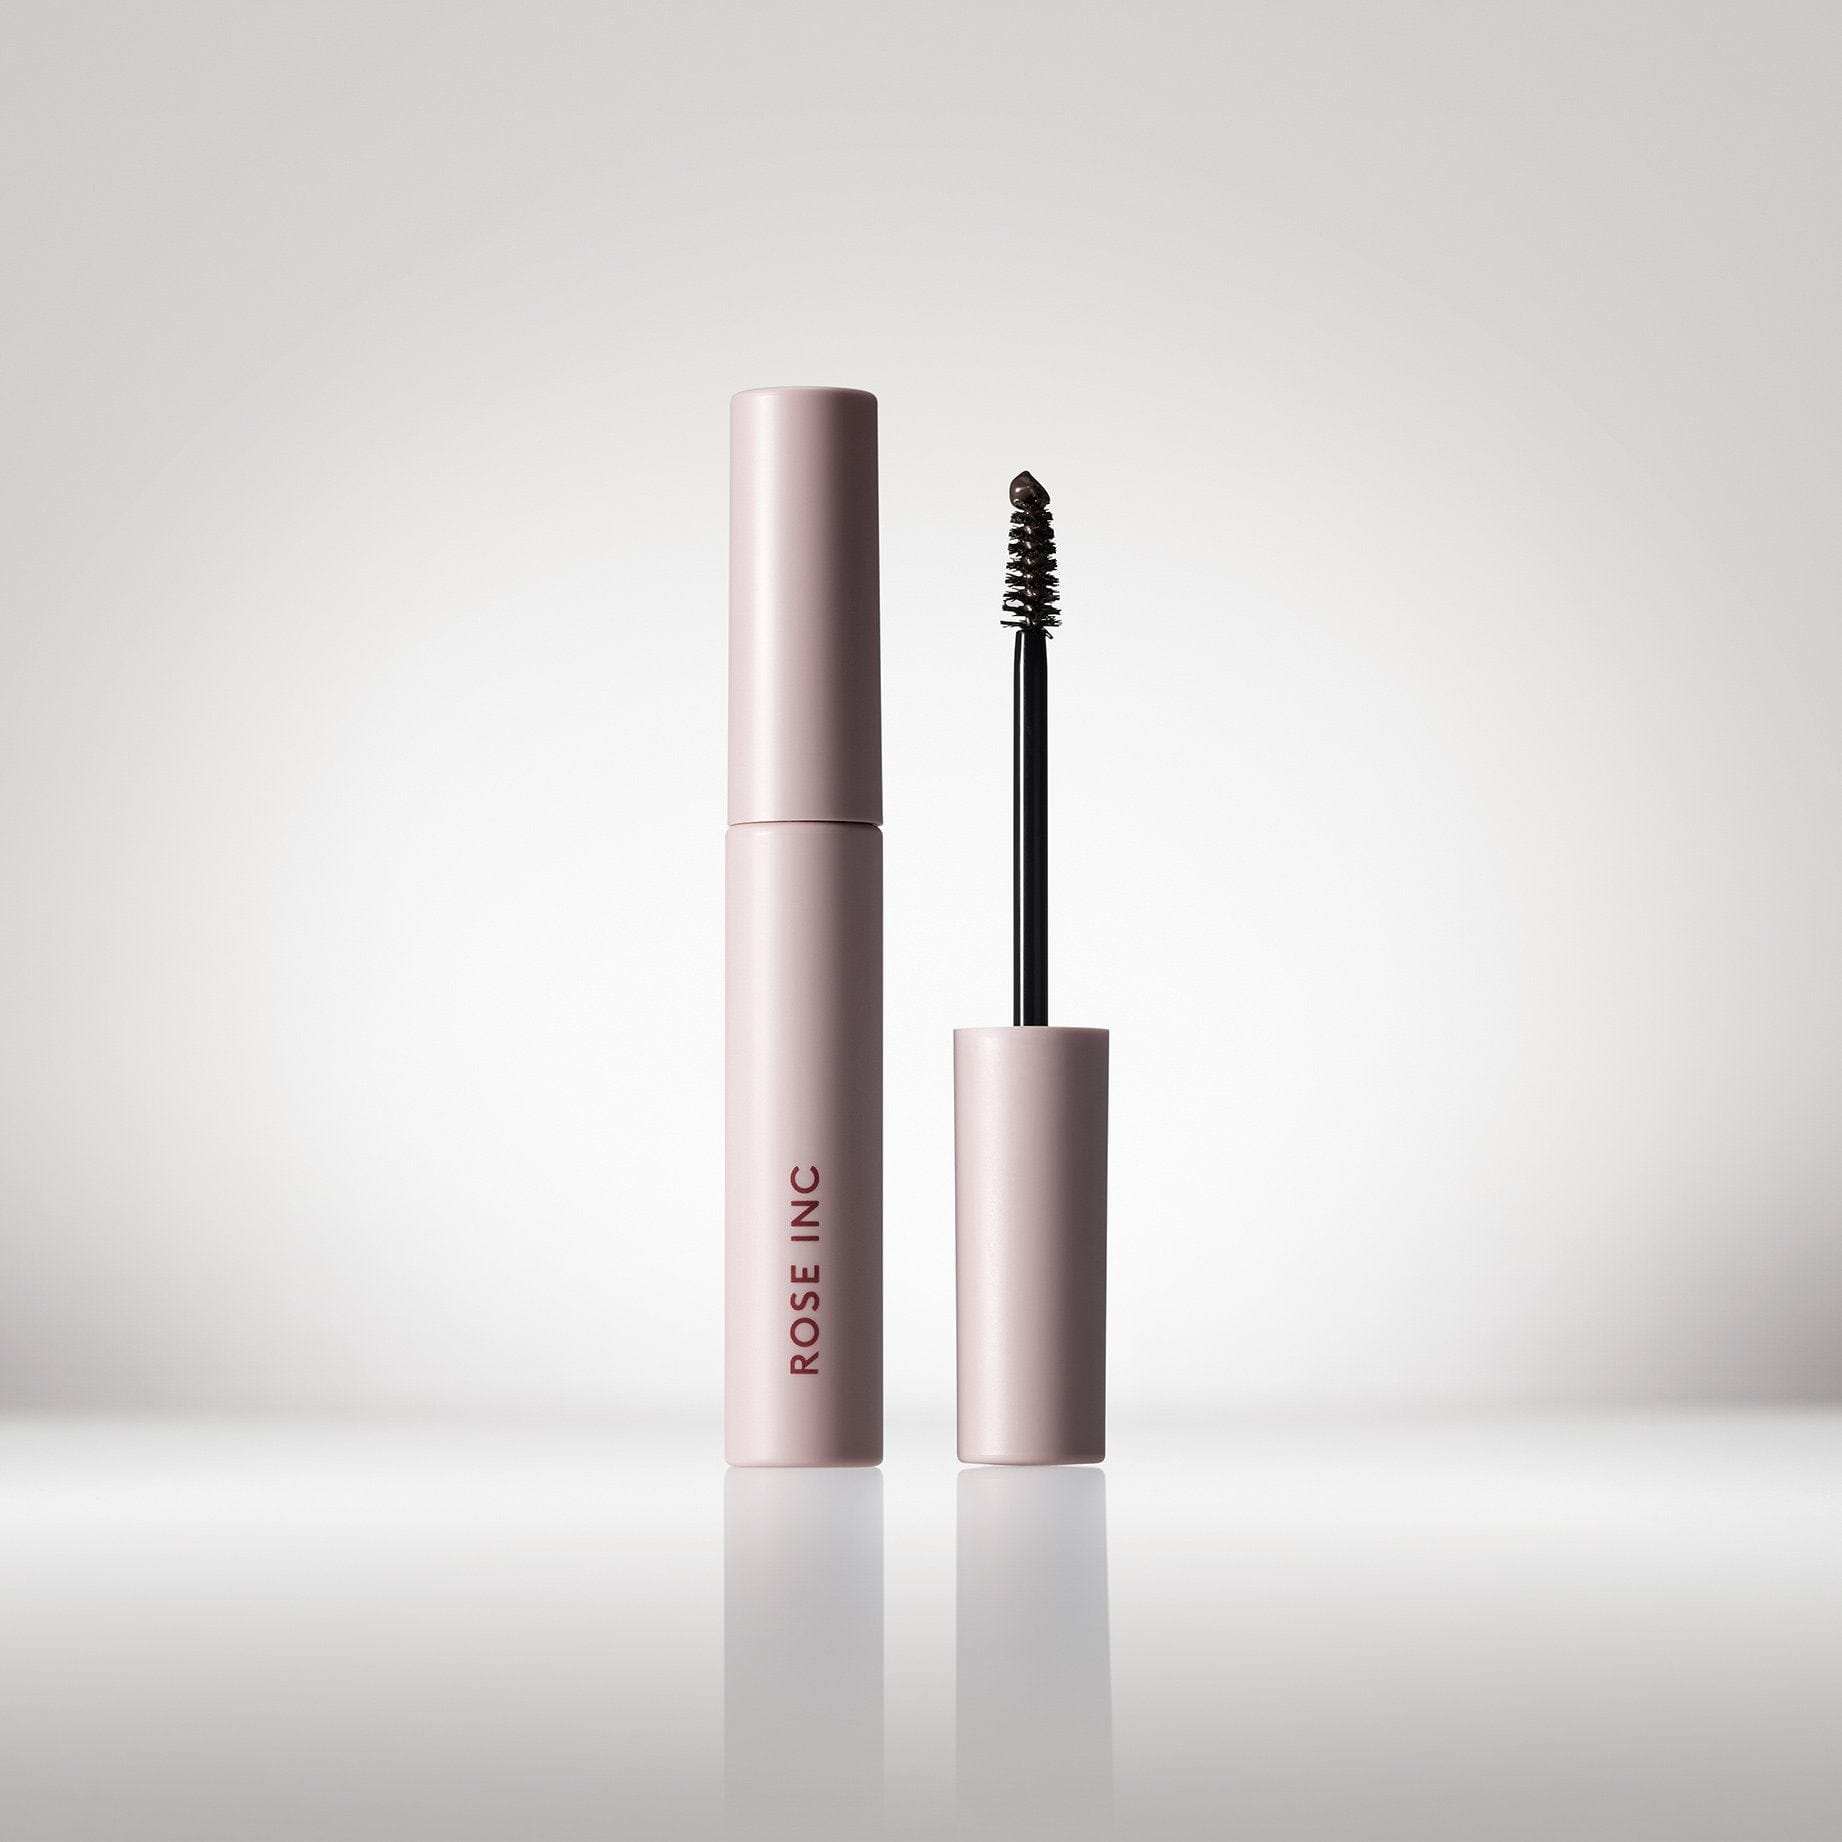 Brow Shaping Gel from Rose Inc